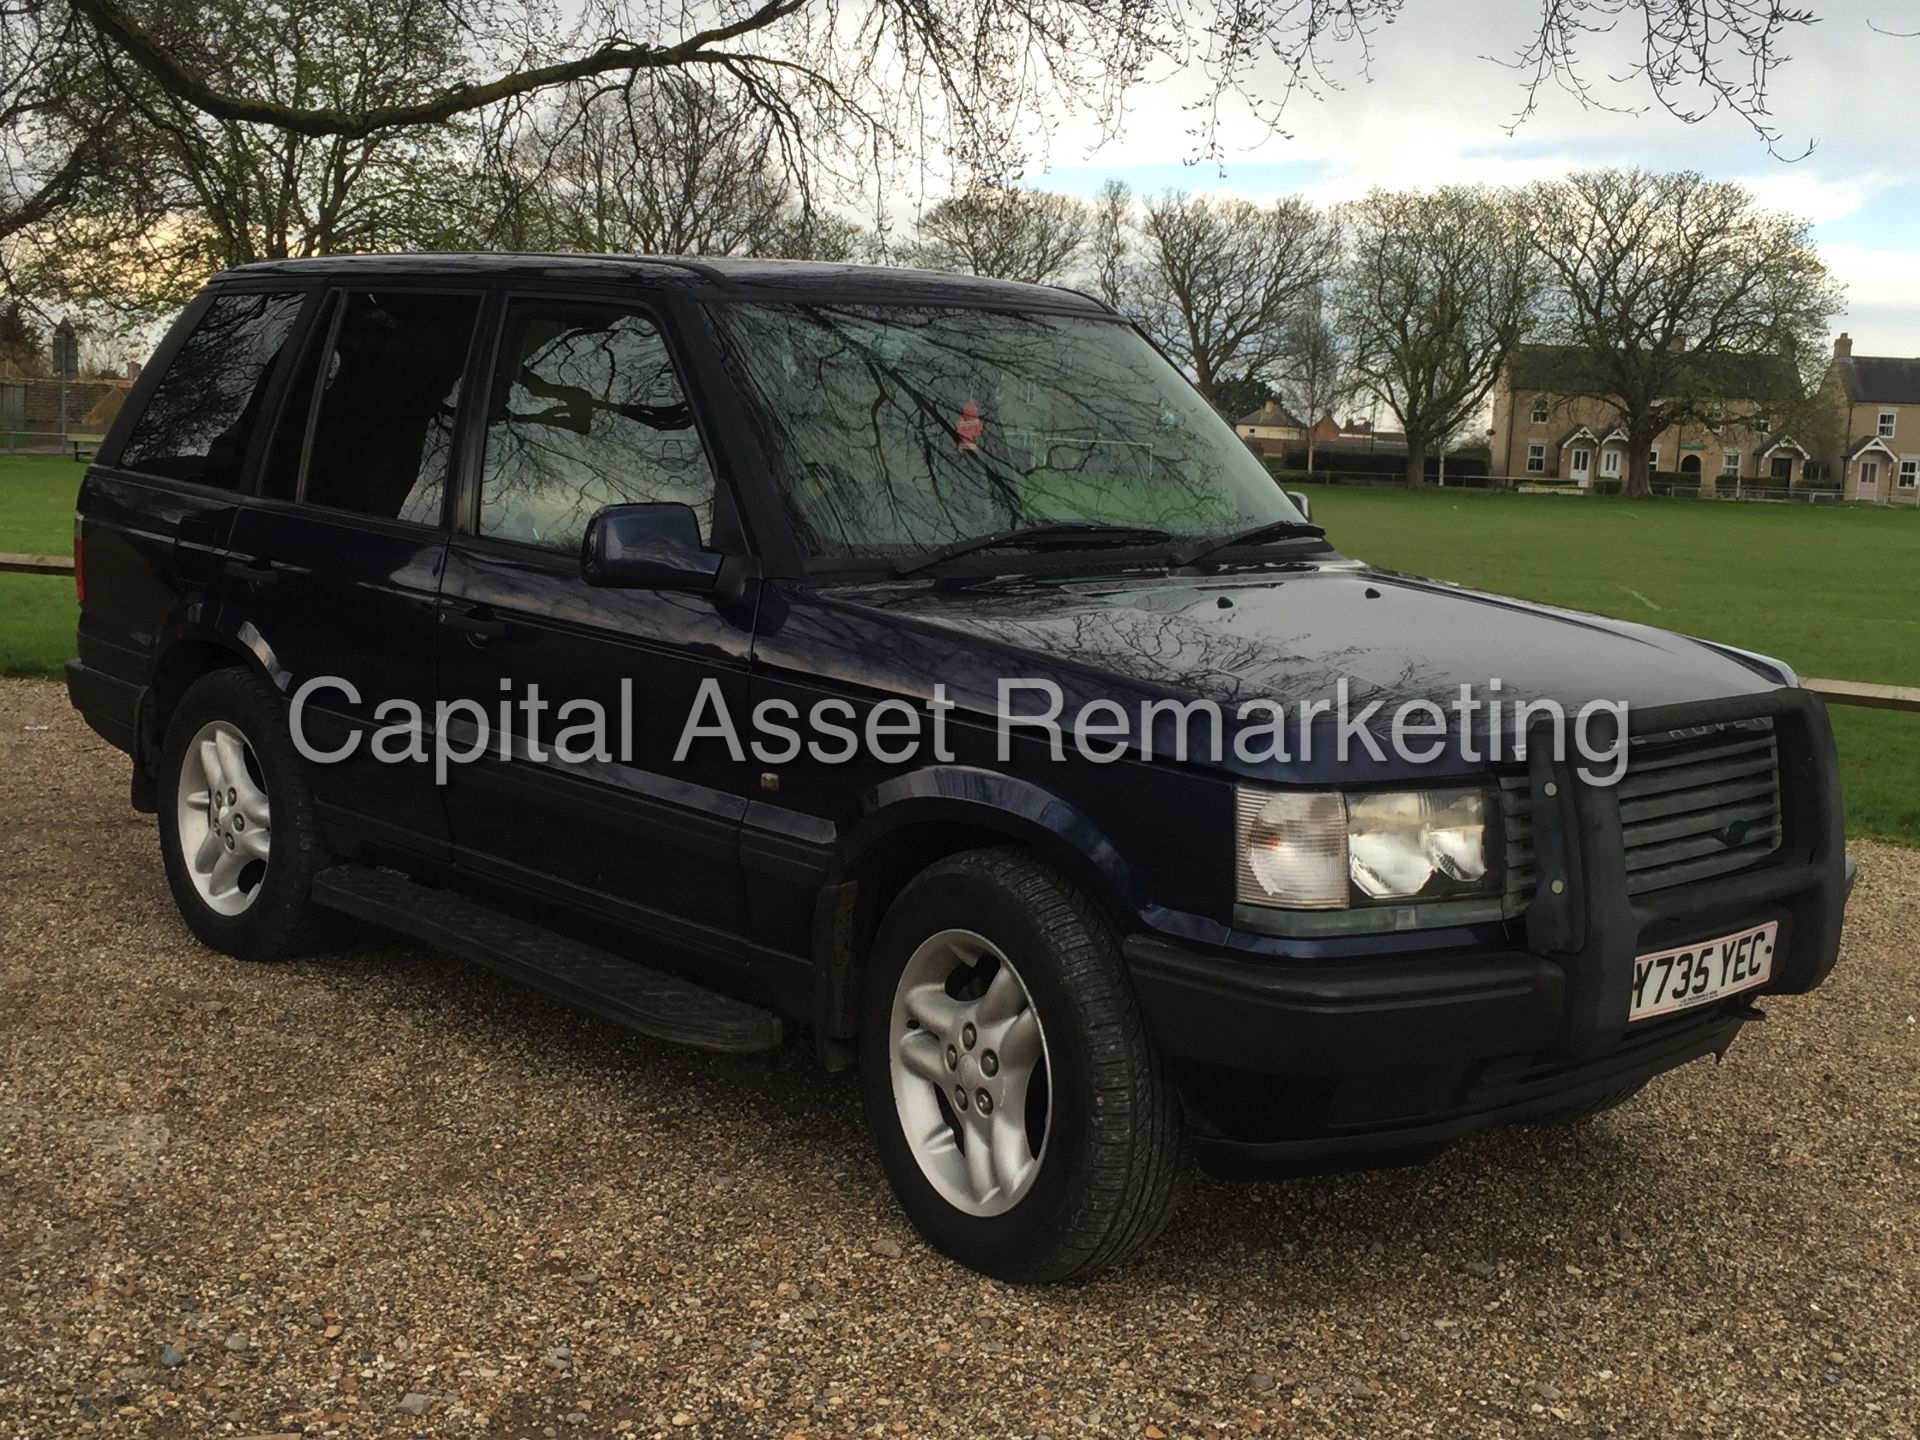 (ON SALE) RANGE ROVER 'COUNTY EDITION' (2001) '2.5 DIESEL - AUTO - LEATHER' *TOP SPEC* (NO VAT)